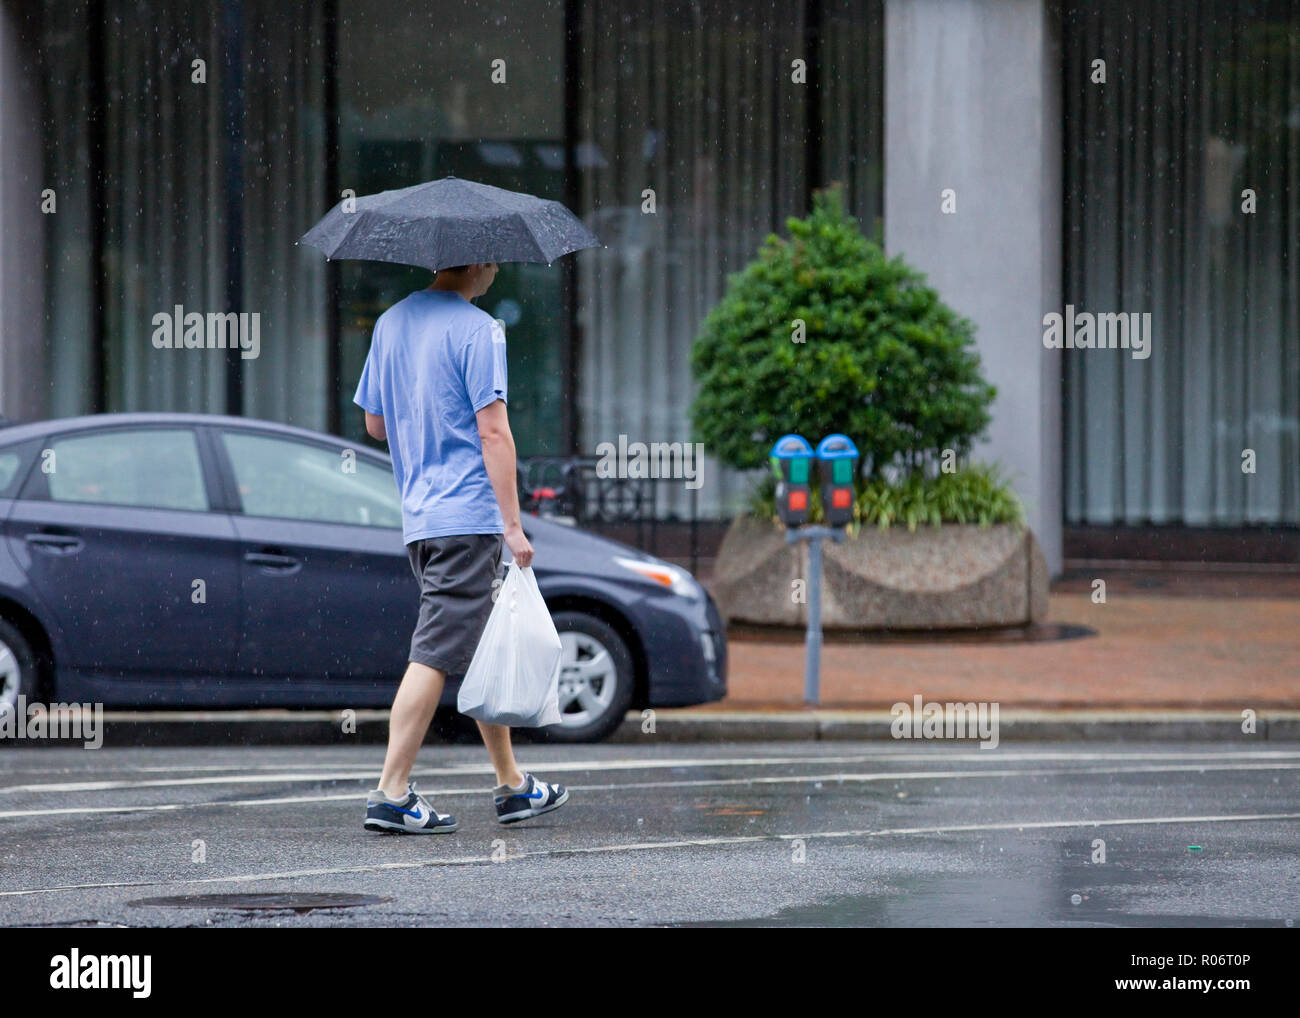 Man walking alone on a rainy day holding an umbrella and grocery bag - USA Stock Photo